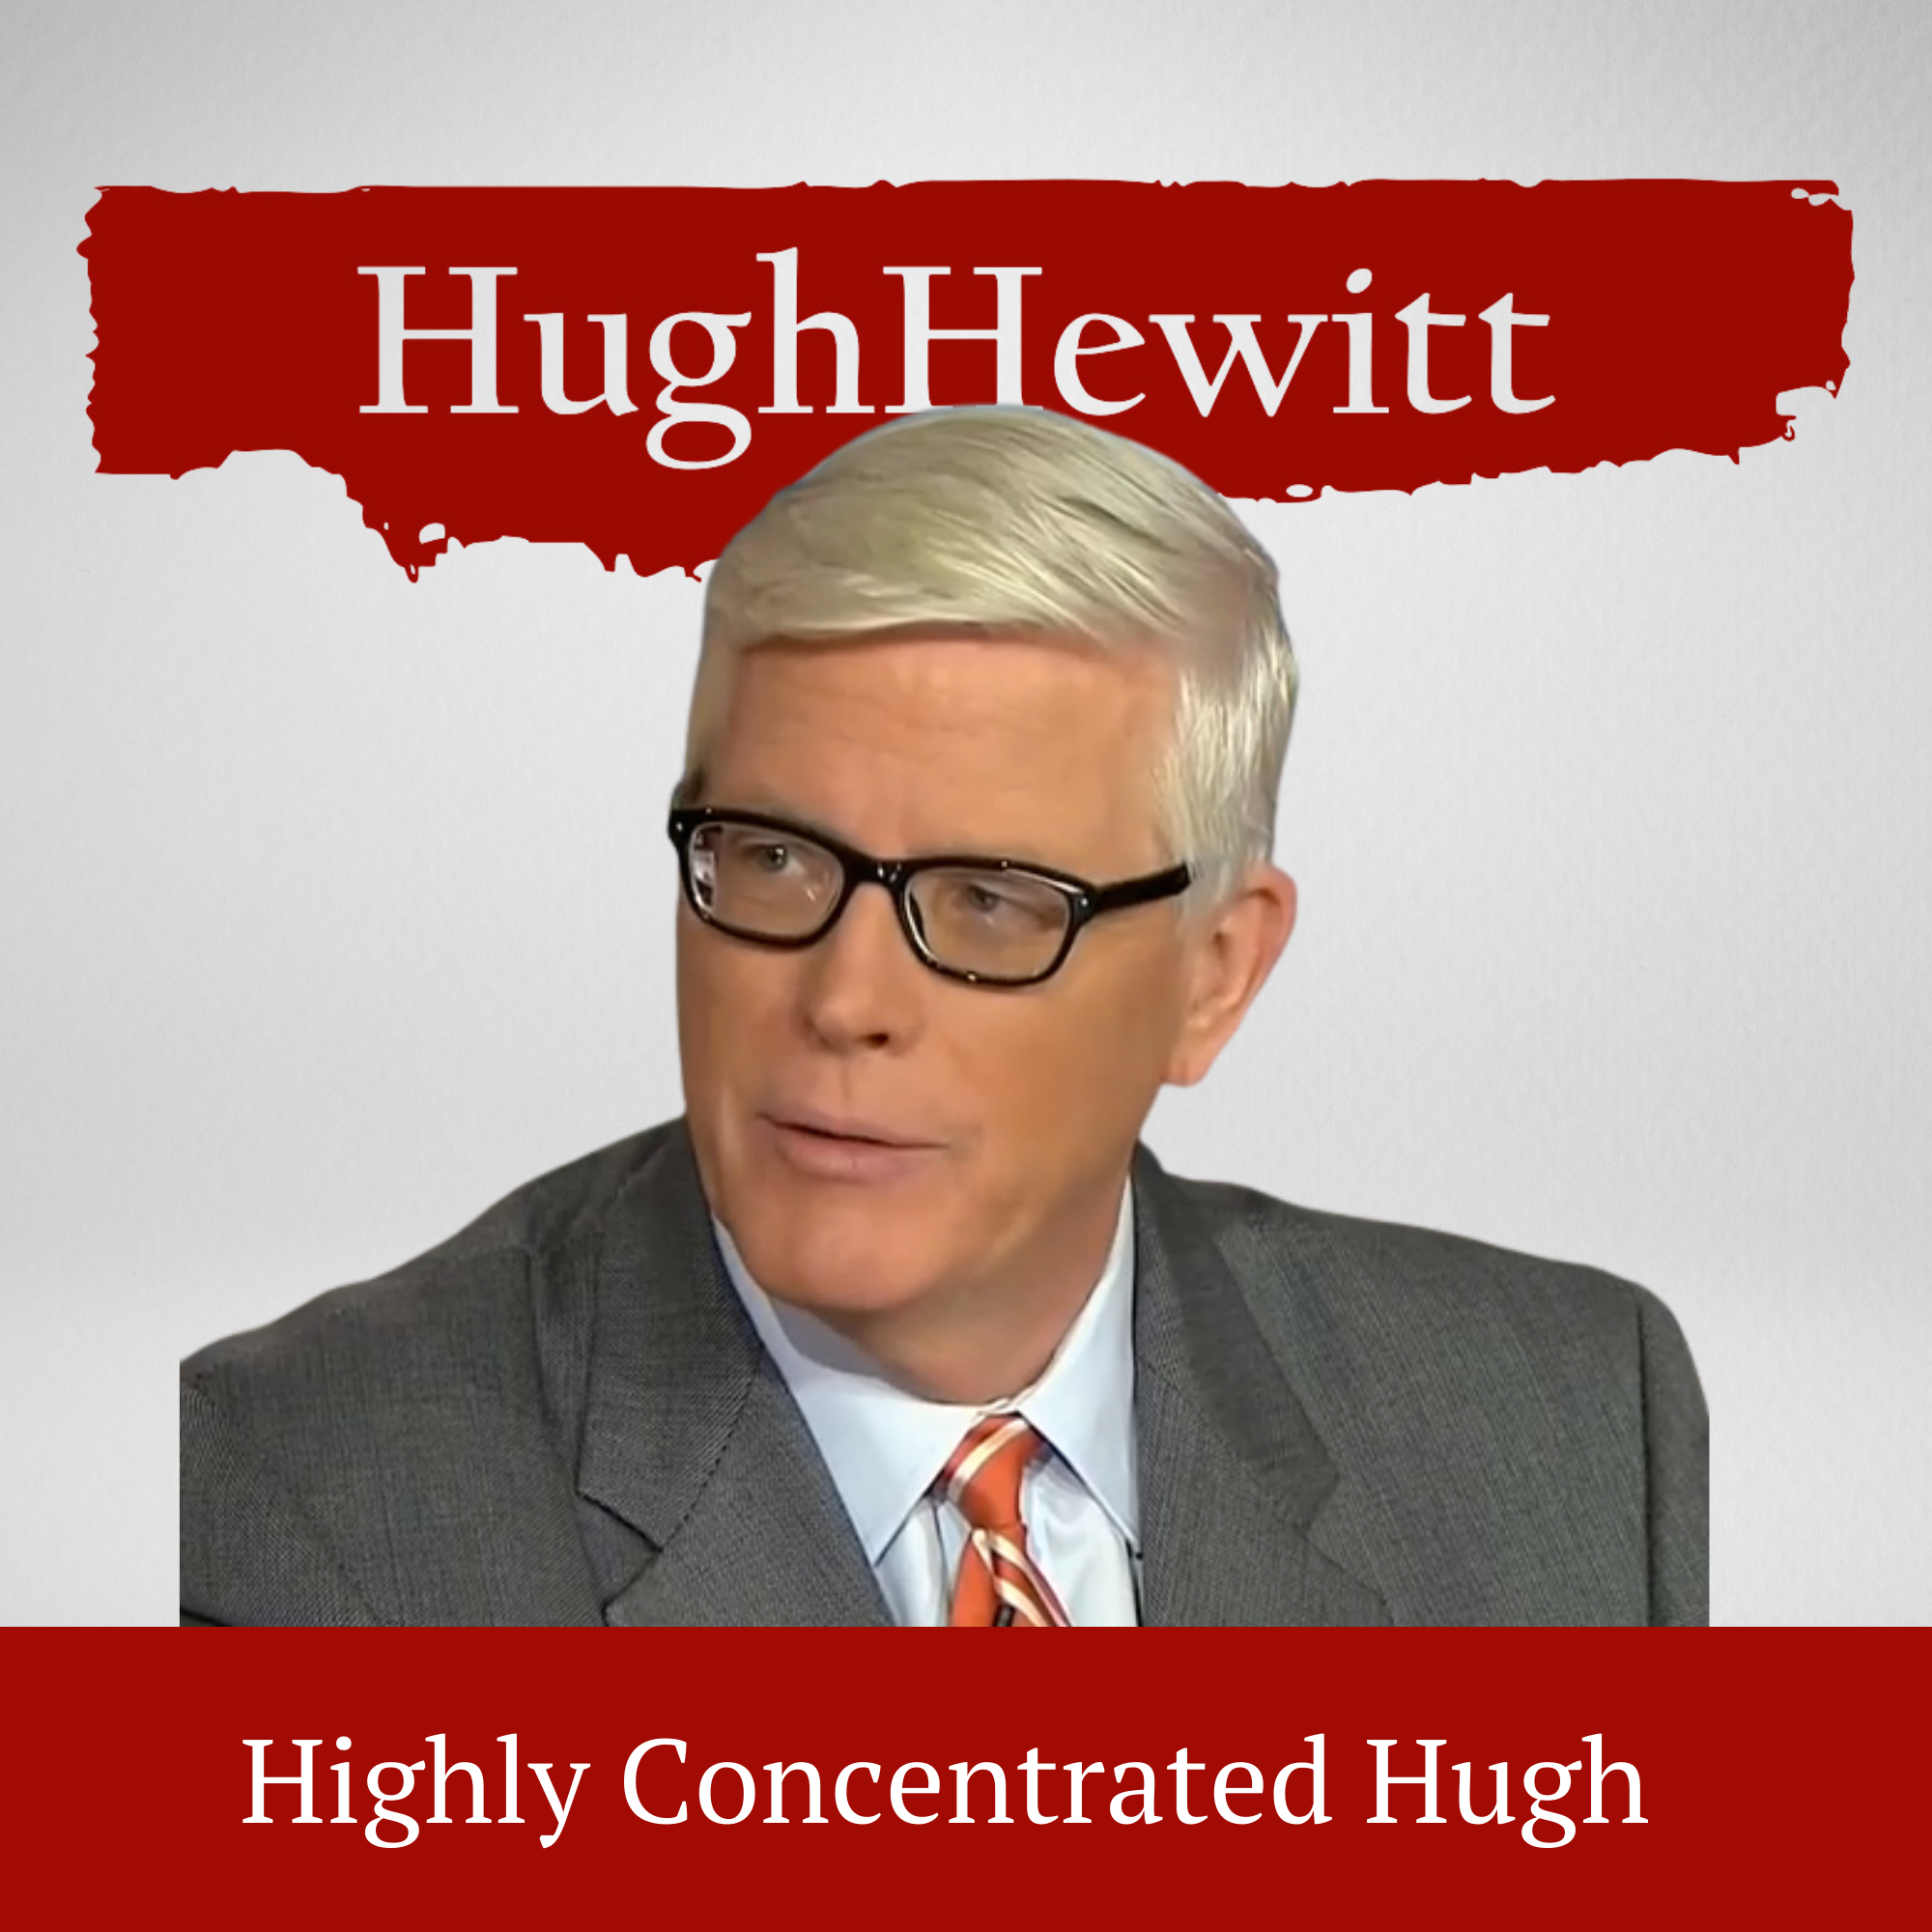 Dr. Oz and Joe O’Dea Join Hugh Hewitt To Talk About Their Races. It’s Election Season!